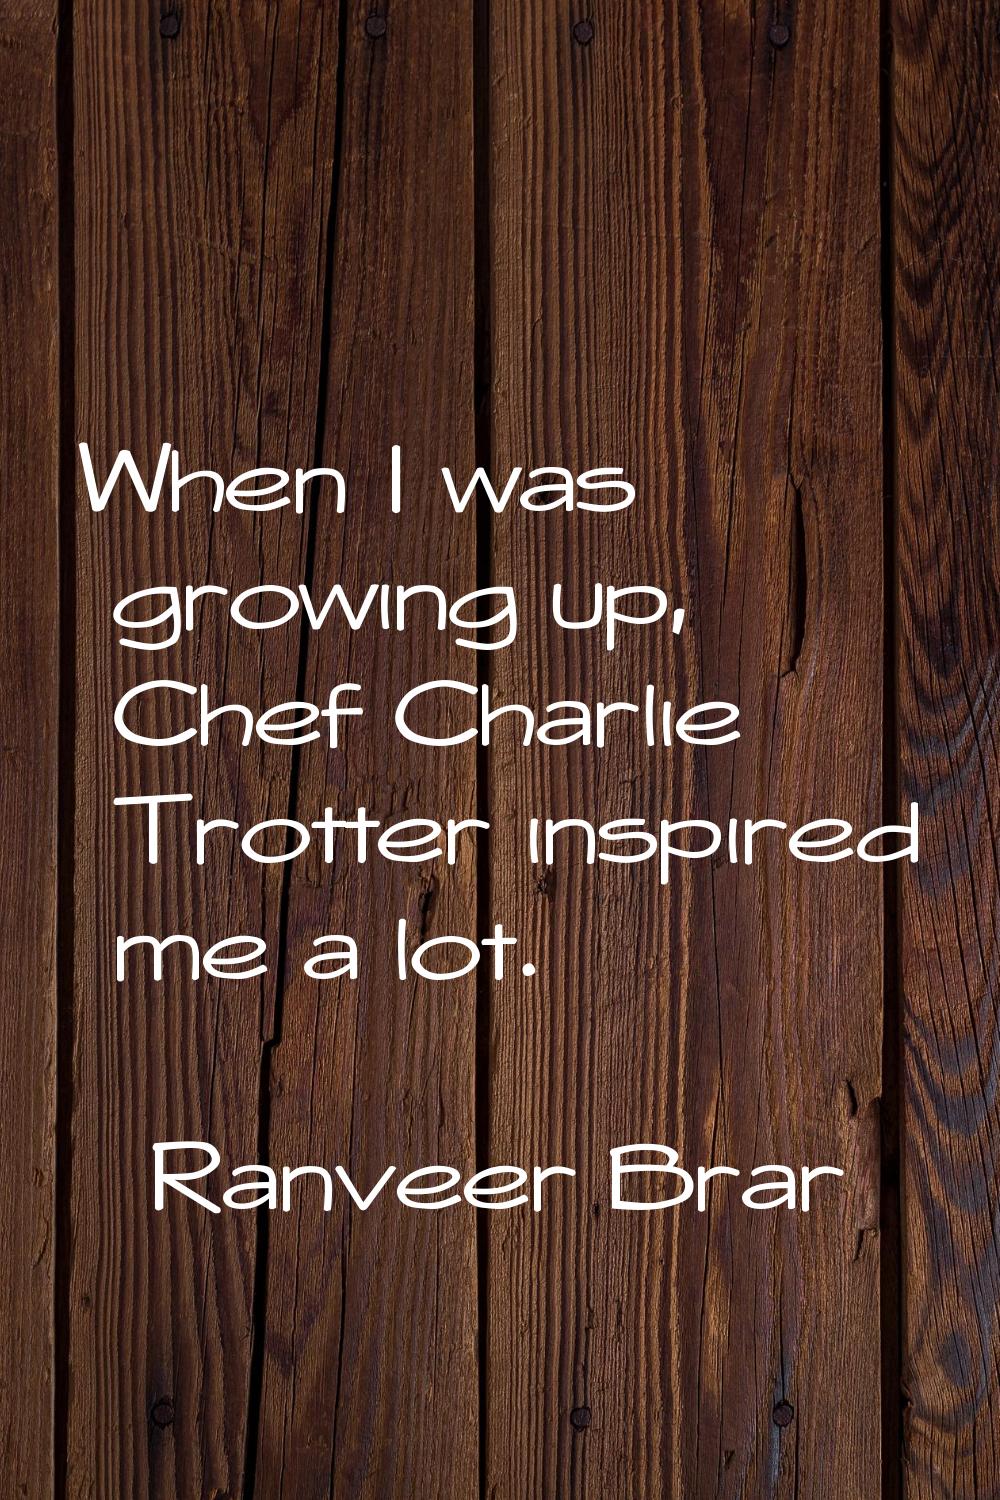 When I was growing up, Chef Charlie Trotter inspired me a lot.